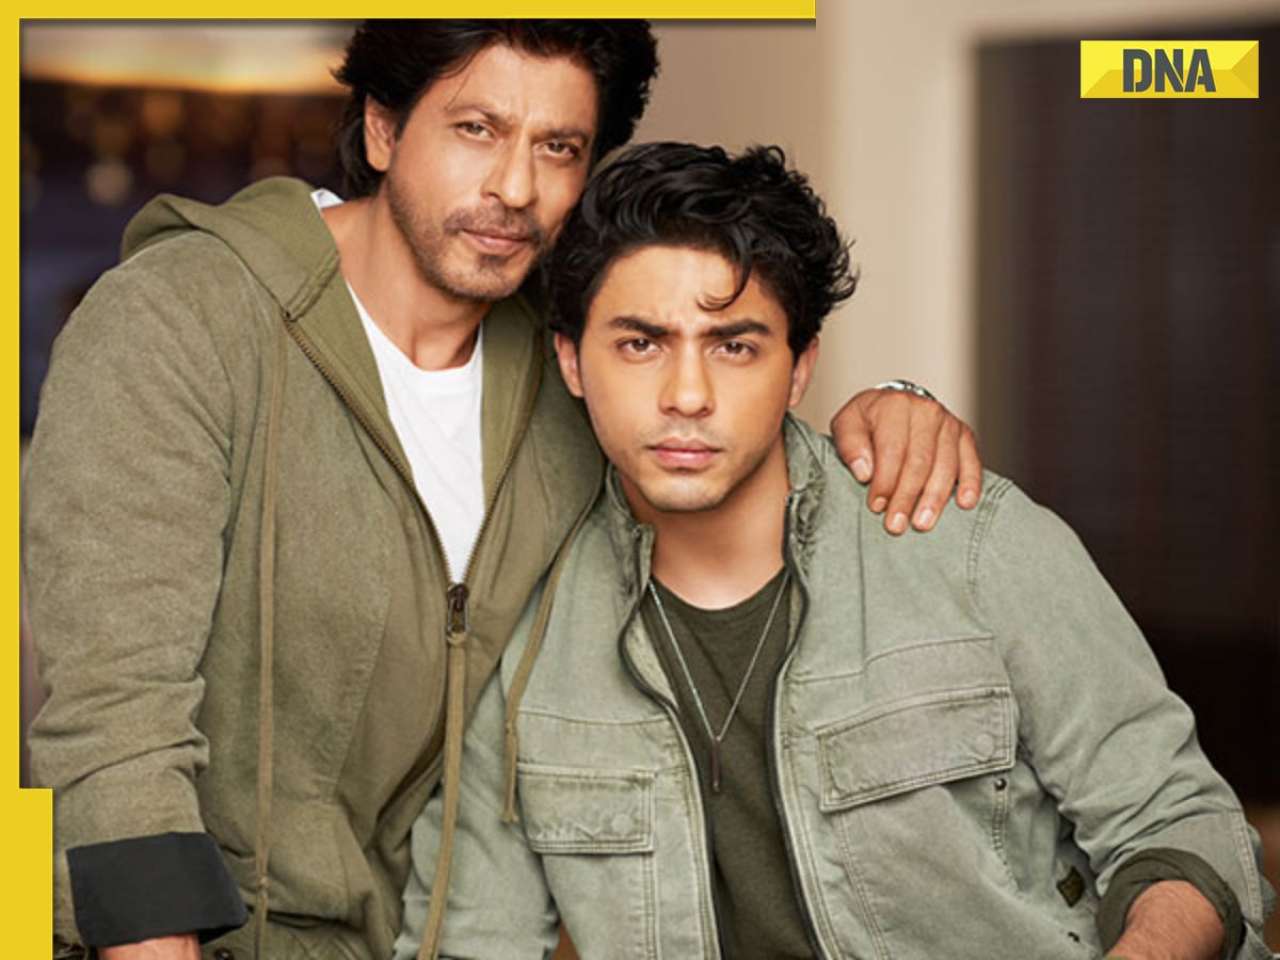 Aryan Khan says working with dad Shah Rukh made his job easier, reveals how he helped his business: 'My dad brings...'